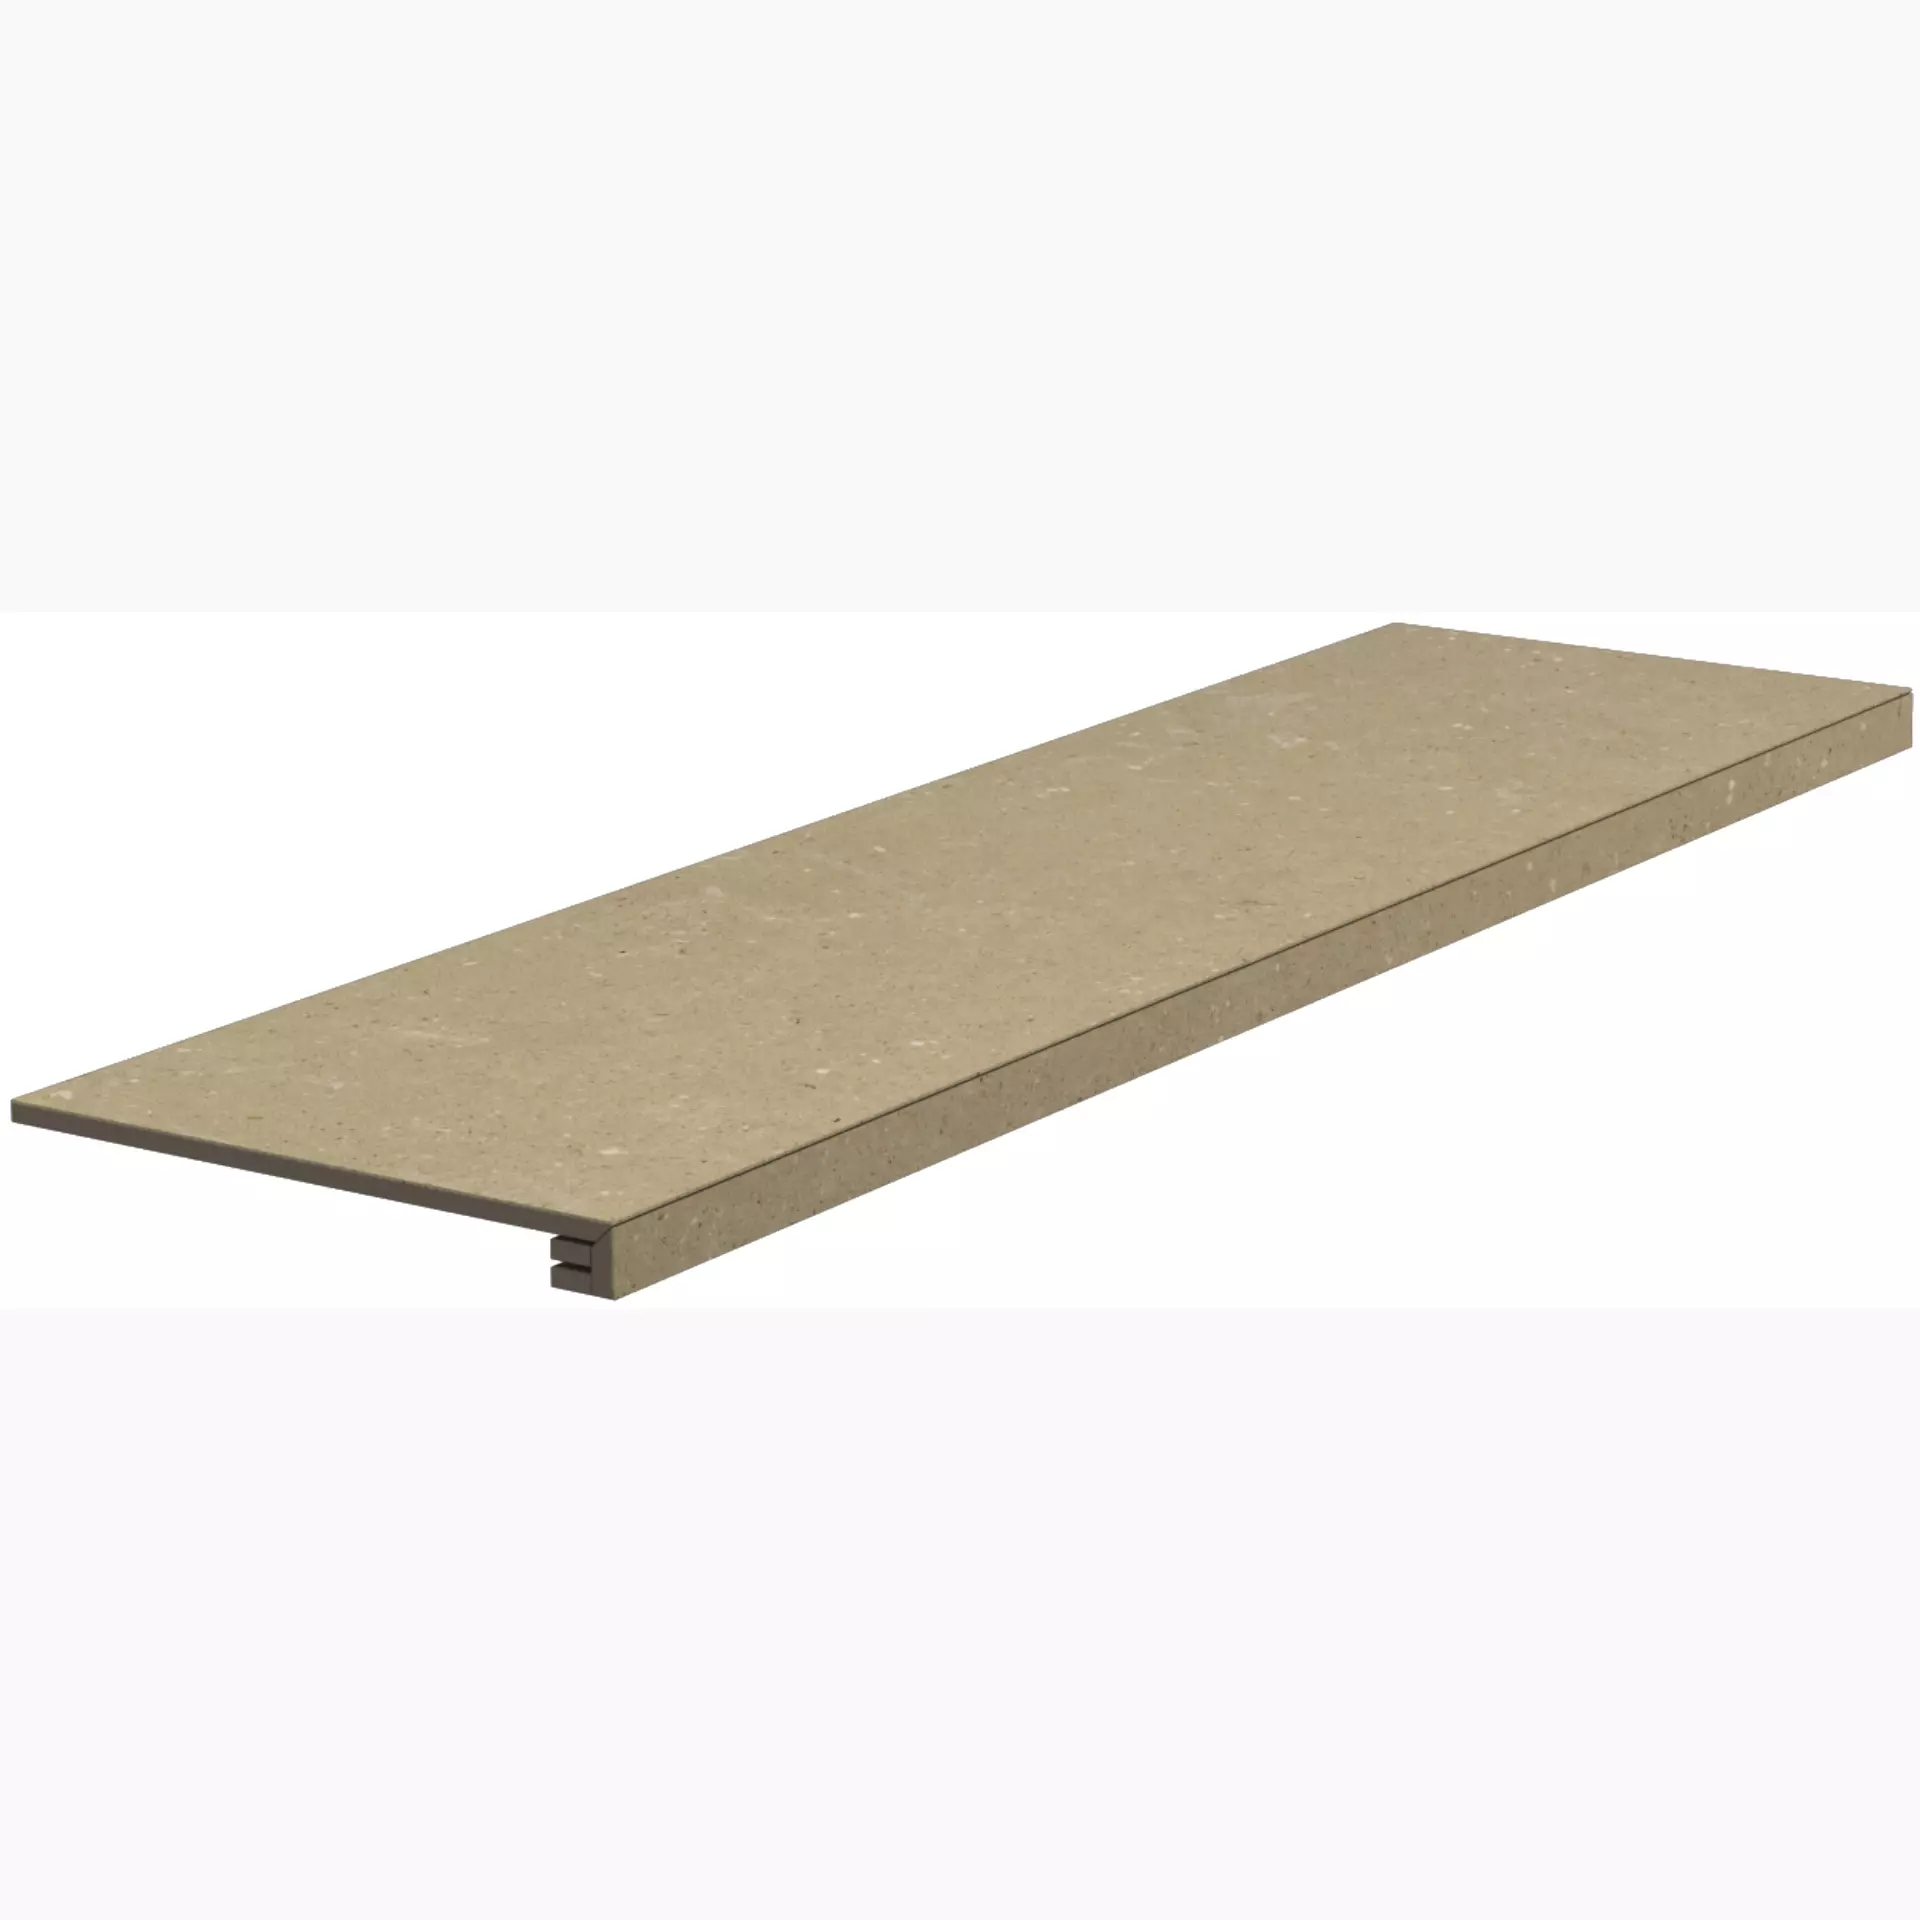 Del Conca Hwd Wild Beige Hwd01 Naturale Corner plate Step Left G3WD01RGS12 33x120cm rectified 8,5mm